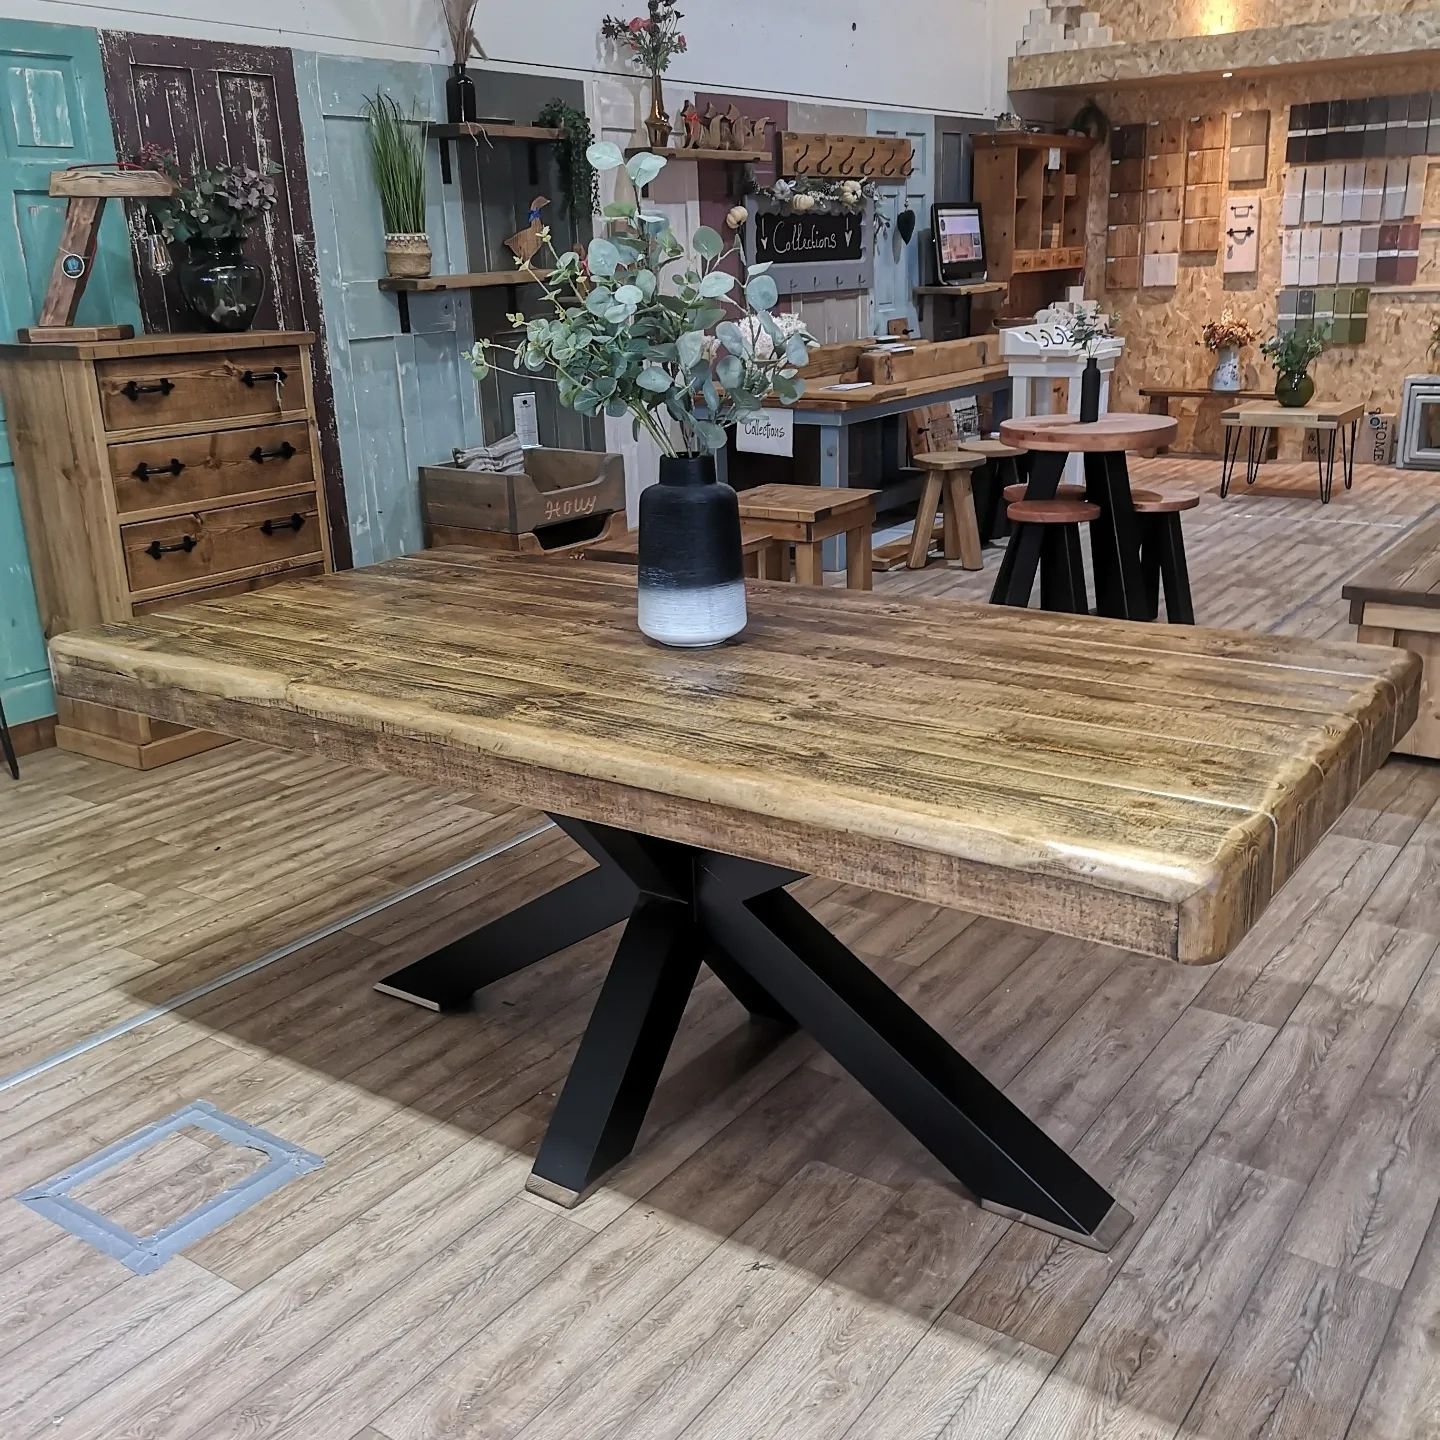 In store now! Franklin 2m Dining Table in Jacobean with Matt Black Steel Legs. &pound;1090 with free delivery, install and care kit.

#diningroom #diningtable #dineinstyle #dineathome #modernrustic #industrialdesign #solidwoodfurniture #rustichomedec